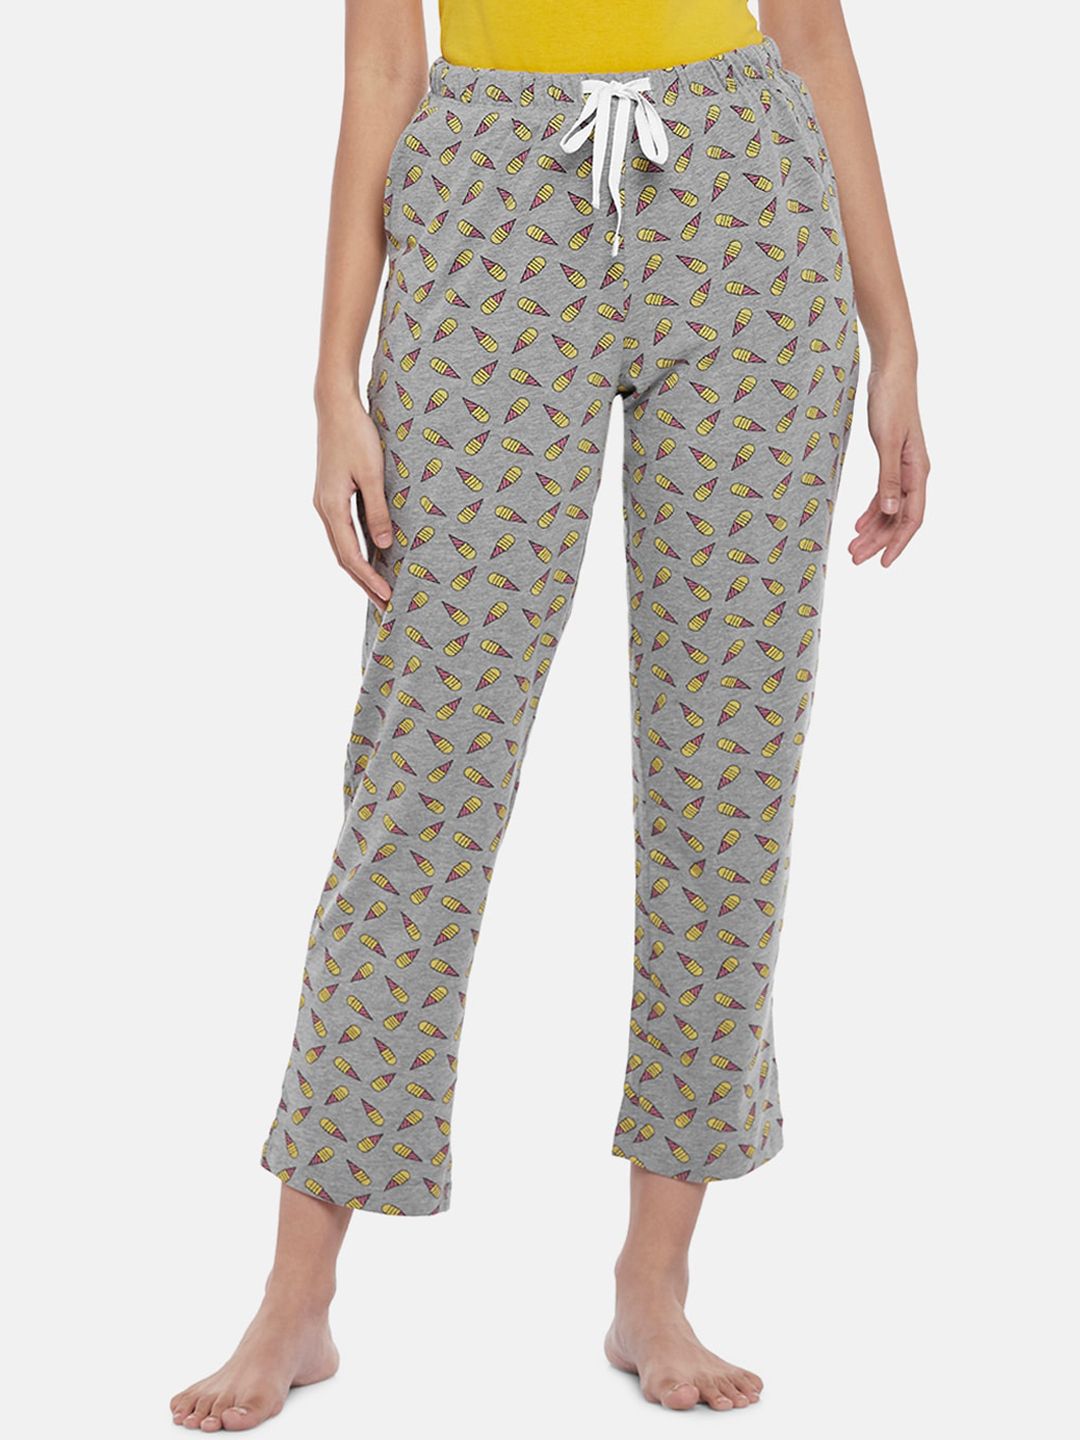 Dreamz by Pantaloons Women Grey Ice-cream Printed Cotton Cropped Lounge Pants Price in India